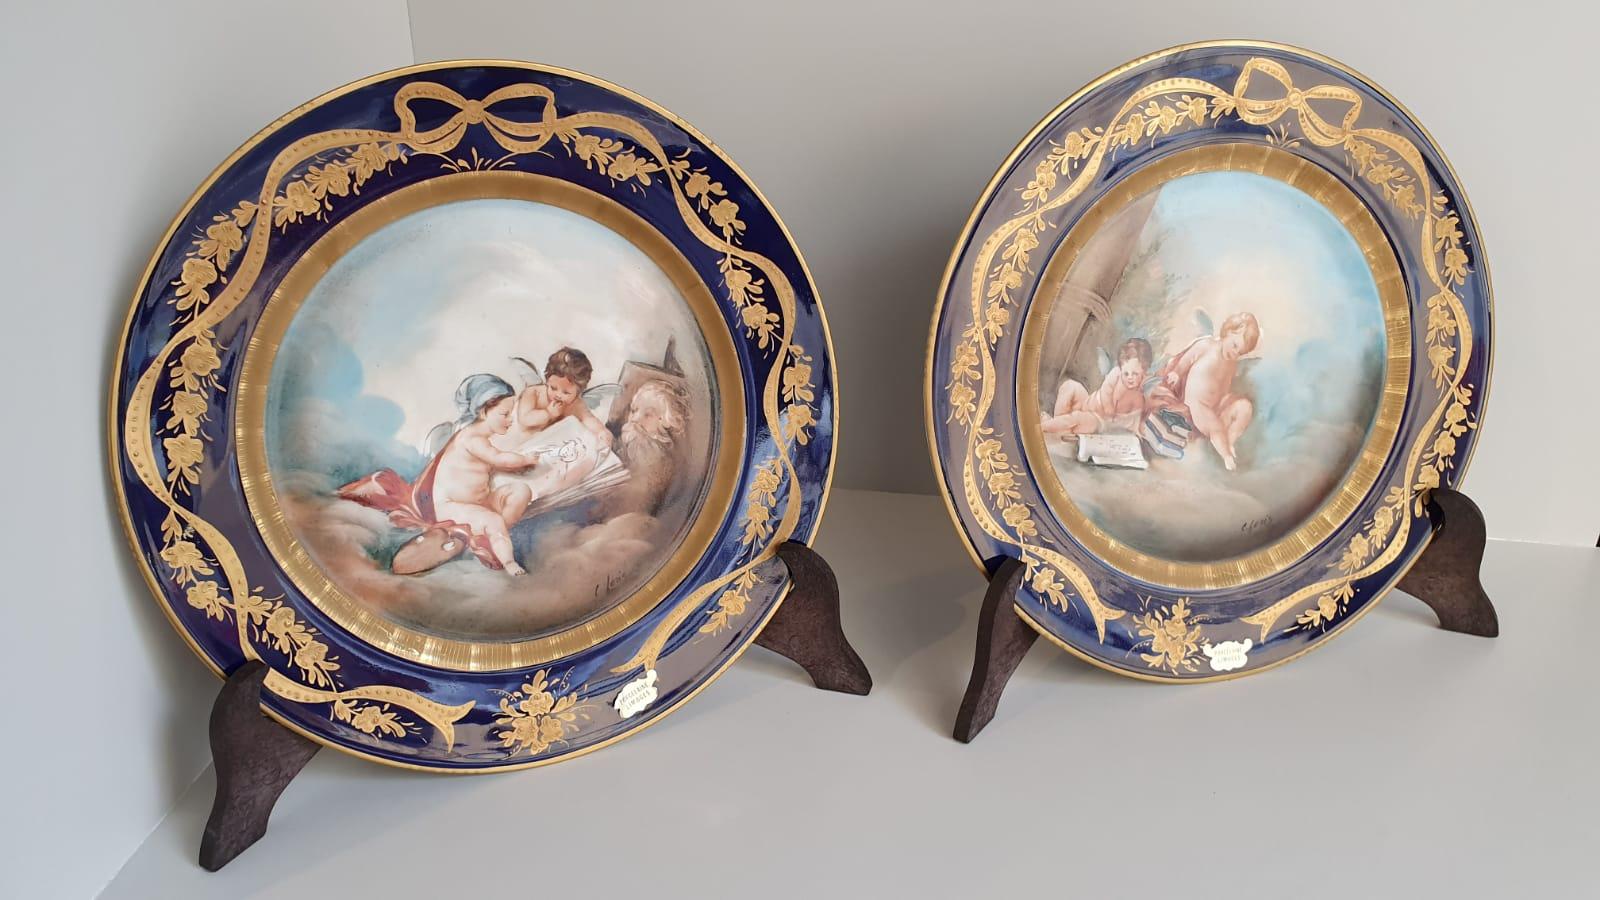 Pair of porcelain plates made in Limoges in France in 1980 and subsequently hand painted by an Italian artist.
The frame of the plate is decorated with floral motifs and a large bow in gold with relief dots, which Stand out on a cobalt blue